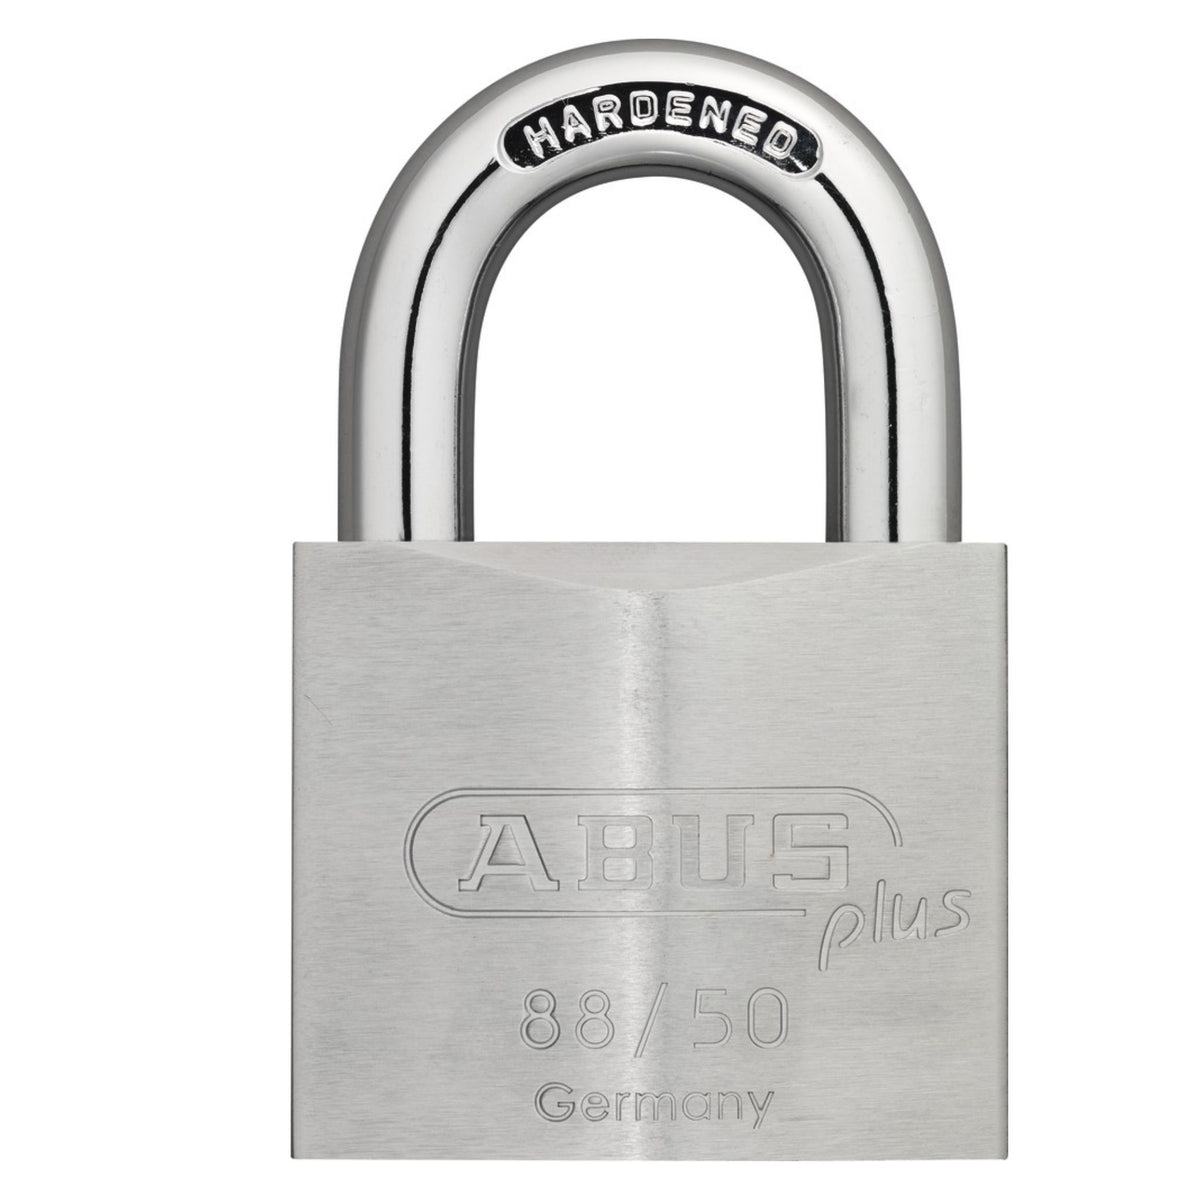 Abus 88/50 Solid Chrome-Plated Brass Series Locks - The Lock Source